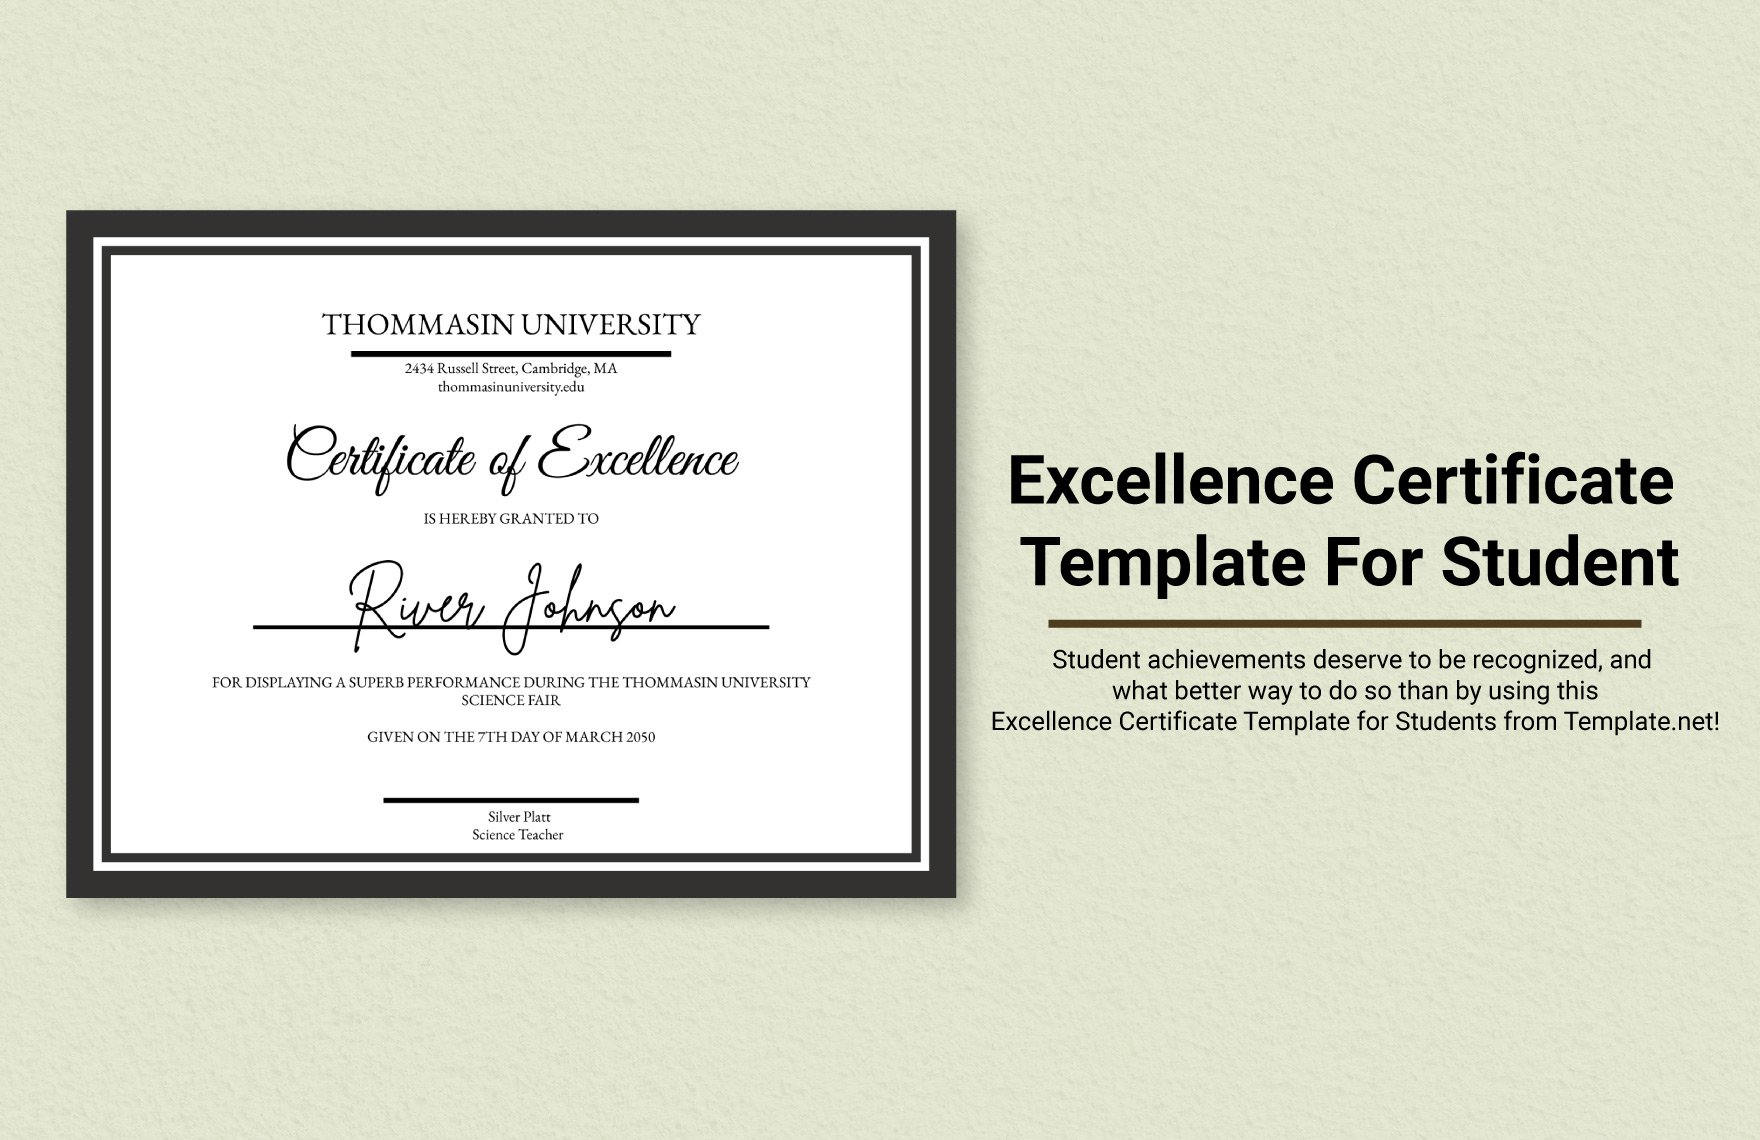 excellence-certificate-template-for-student